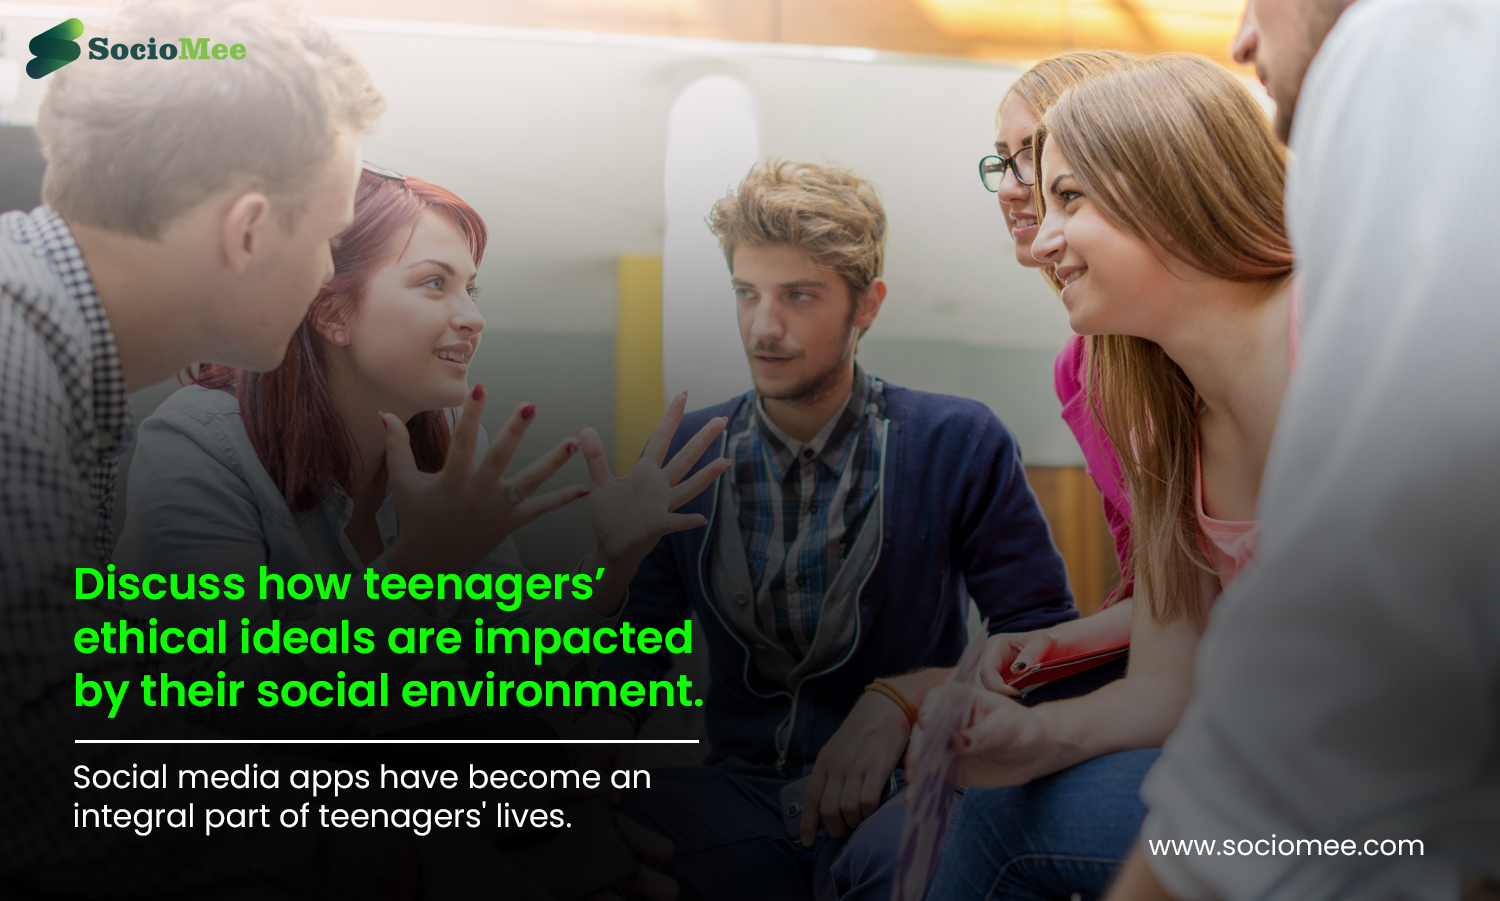 Discuss how teenagers’ ethical ideals are impacted by their social environment.